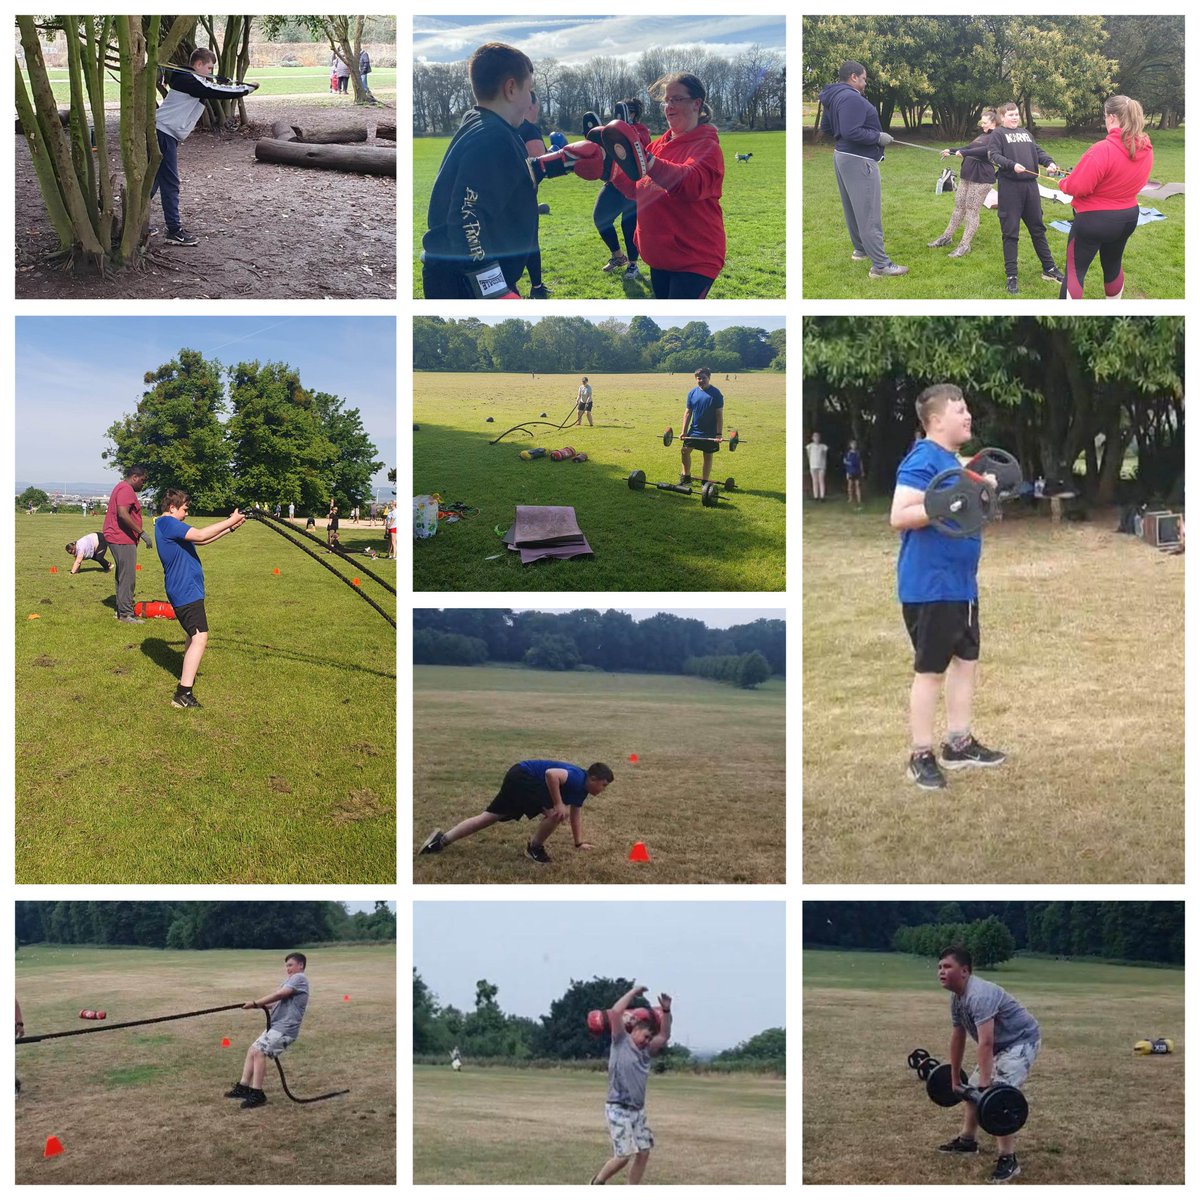 proud of this one
joined circuit training for 3 months to help him gain his bronze Duke of Edinburgh (still got other parts to finish) award he's doing with school. 
pushed himself every week. 
#keepfit #physical #bronze #DoE #D_wildfitness #brightstowe